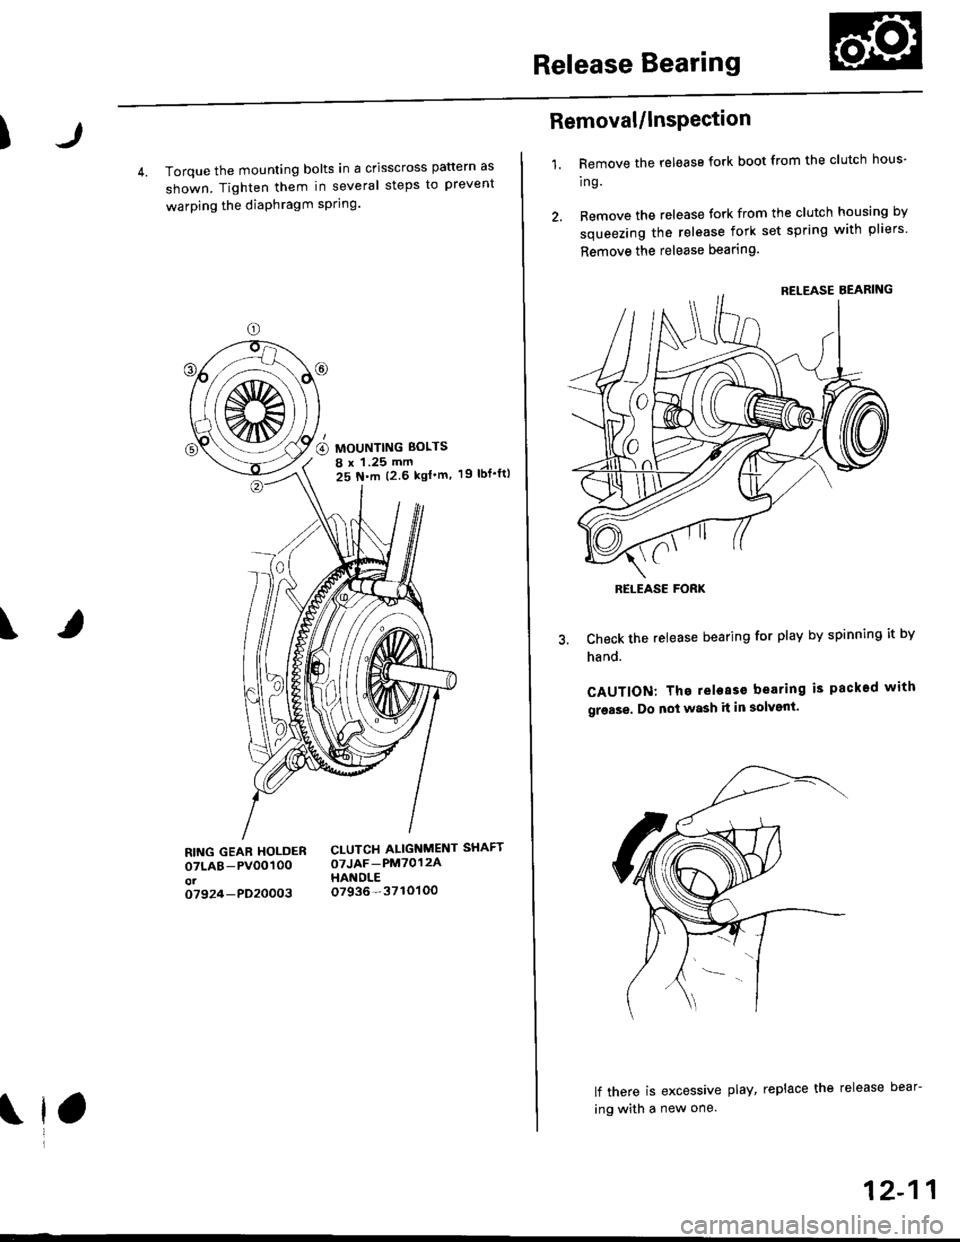 HONDA CIVIC 1999 6.G Workshop Manual Release Bearing
)
4. Torque the mounting bolts in a crisscross pattern as
shown. Tighten them in several steps to prevent
warping the diaPhragm sPring.
19 rbf.ft)
\
RING GEAR HOLDERoTLAB-PV00100ot0792